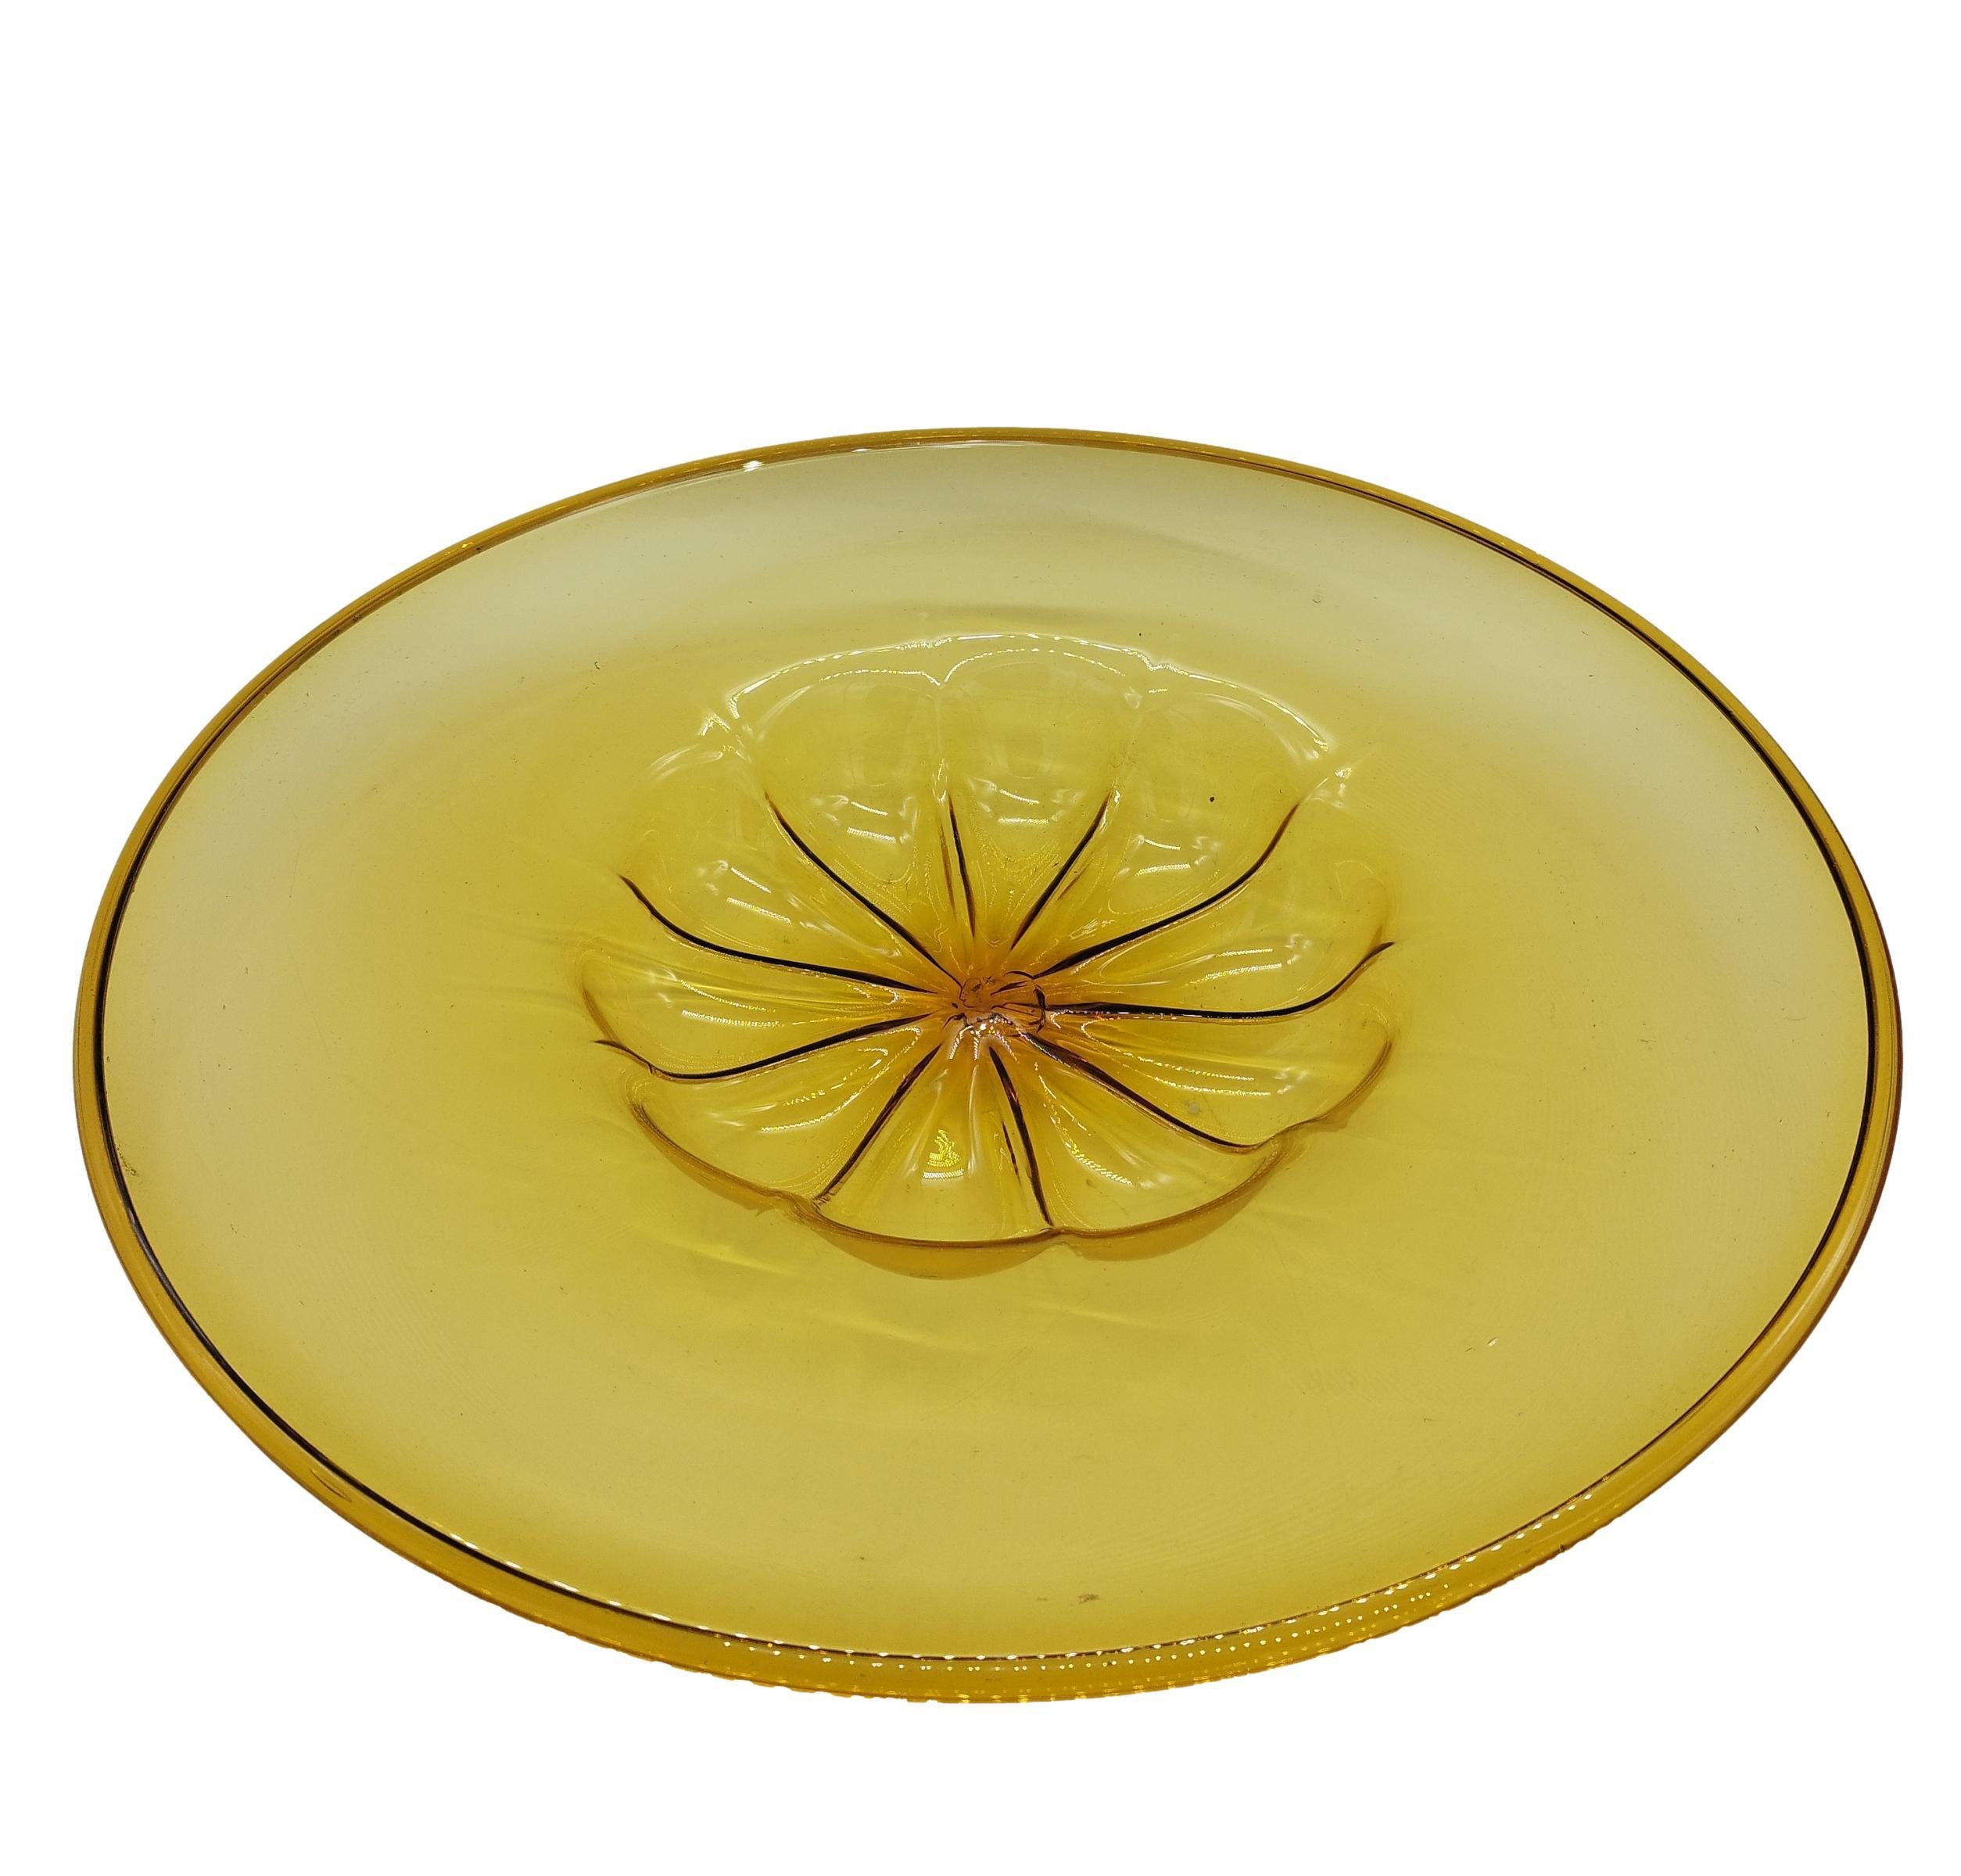 Large blown glass dish in transparent yellow glass, designed by Vittorio Zecchin and produced by Venini, Murano Venezia. The dish was produced in several sizes, this is the largest version, very rare.